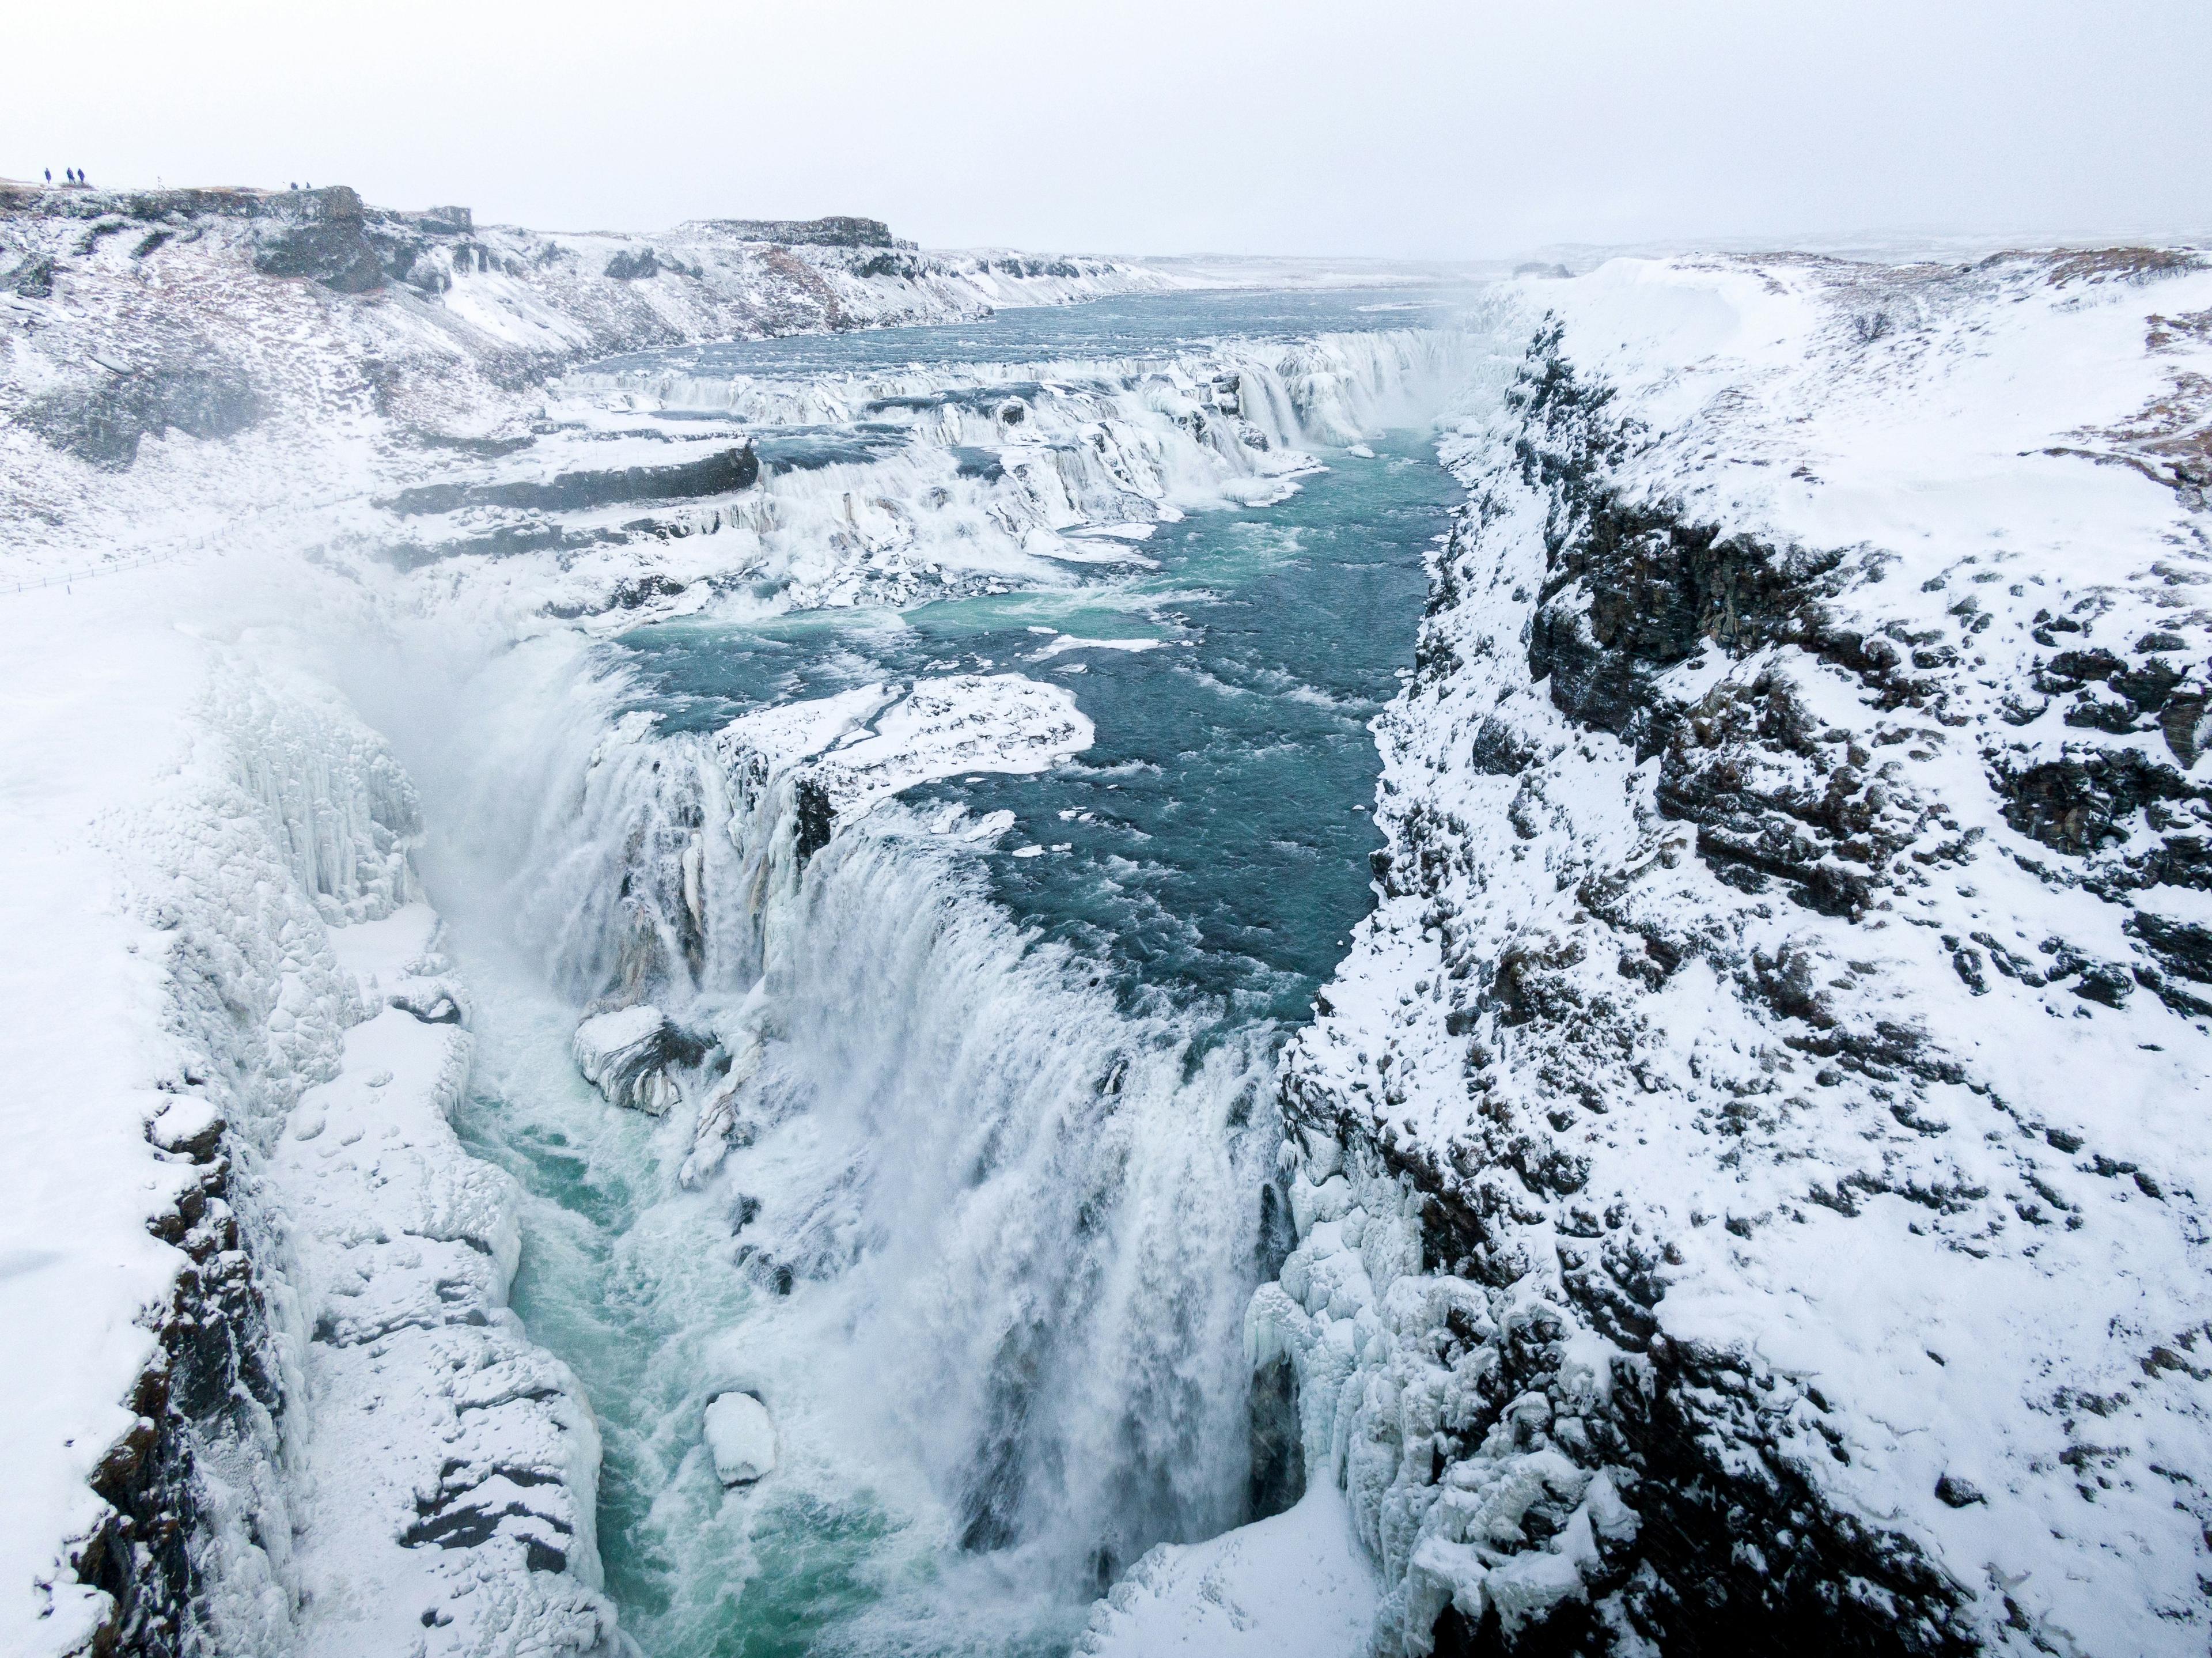 A wide, multi-tiered waterfall surrounded by snow-covered cliffs, its icy waters flowing through a rugged landscape, evoking the serene and frosty beauty of Iceland's natural wonders.